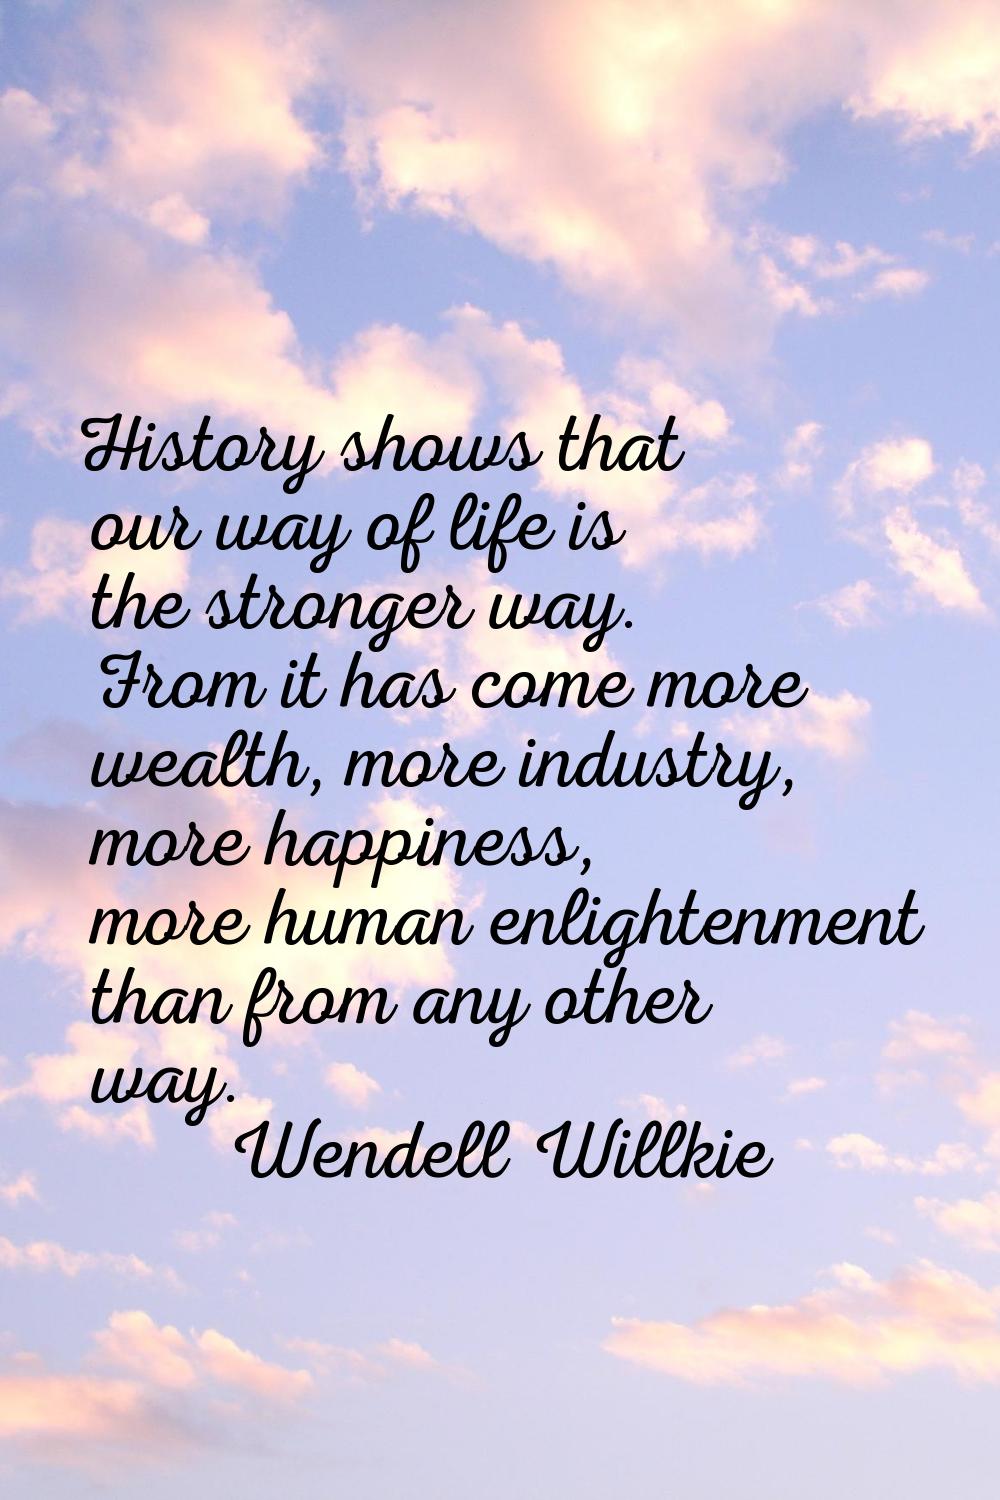 History shows that our way of life is the stronger way. From it has come more wealth, more industry